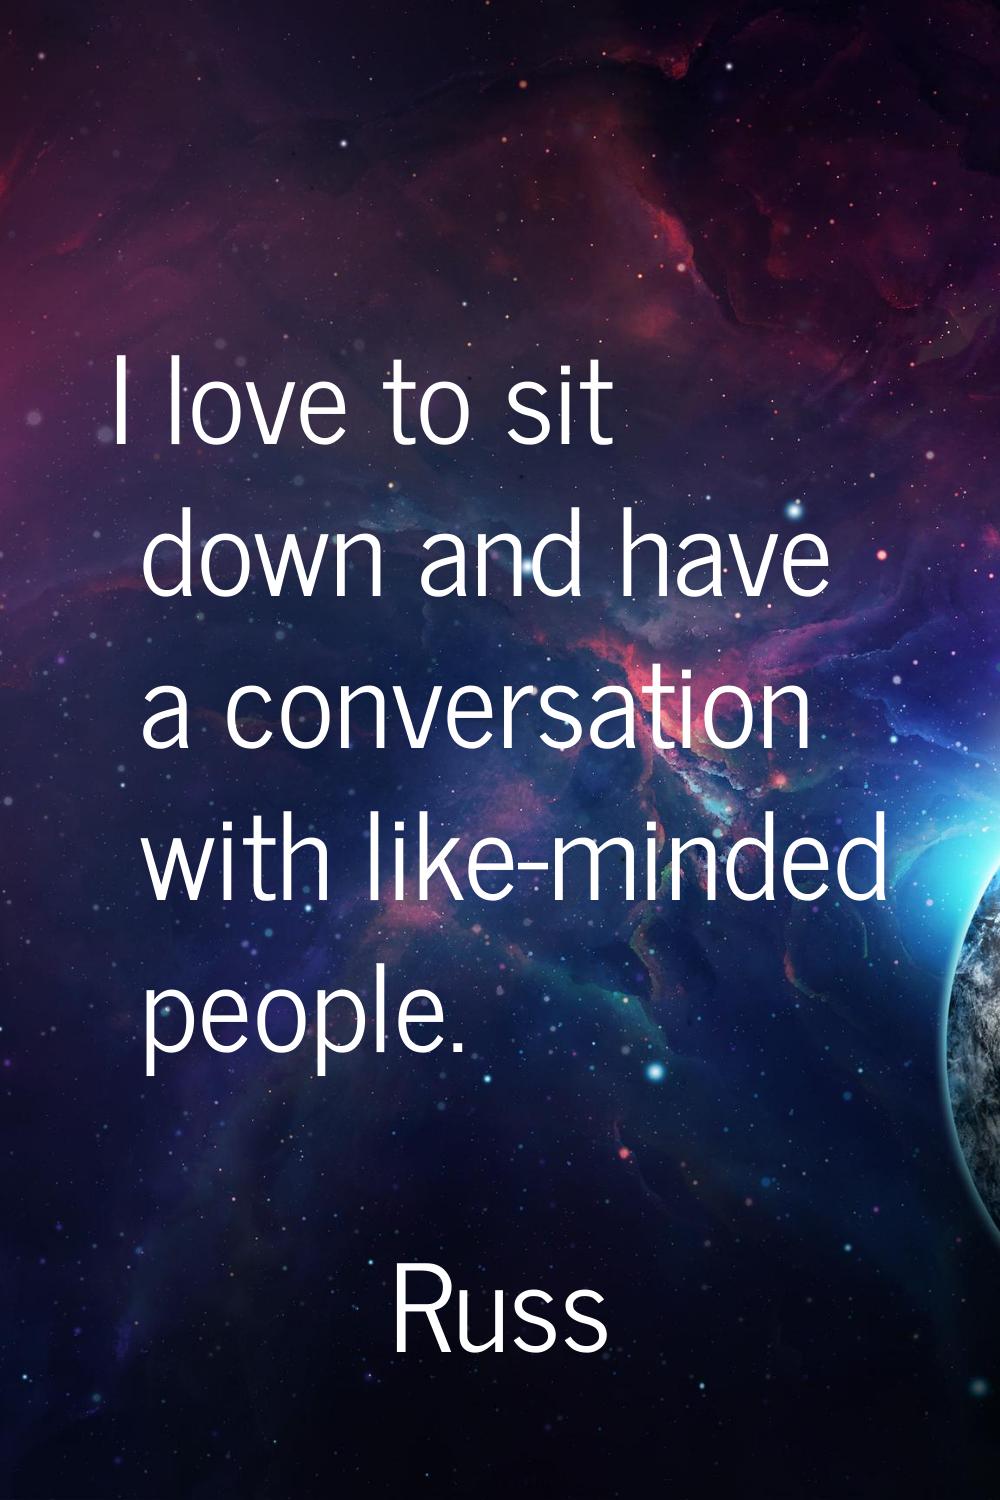 I love to sit down and have a conversation with like-minded people.